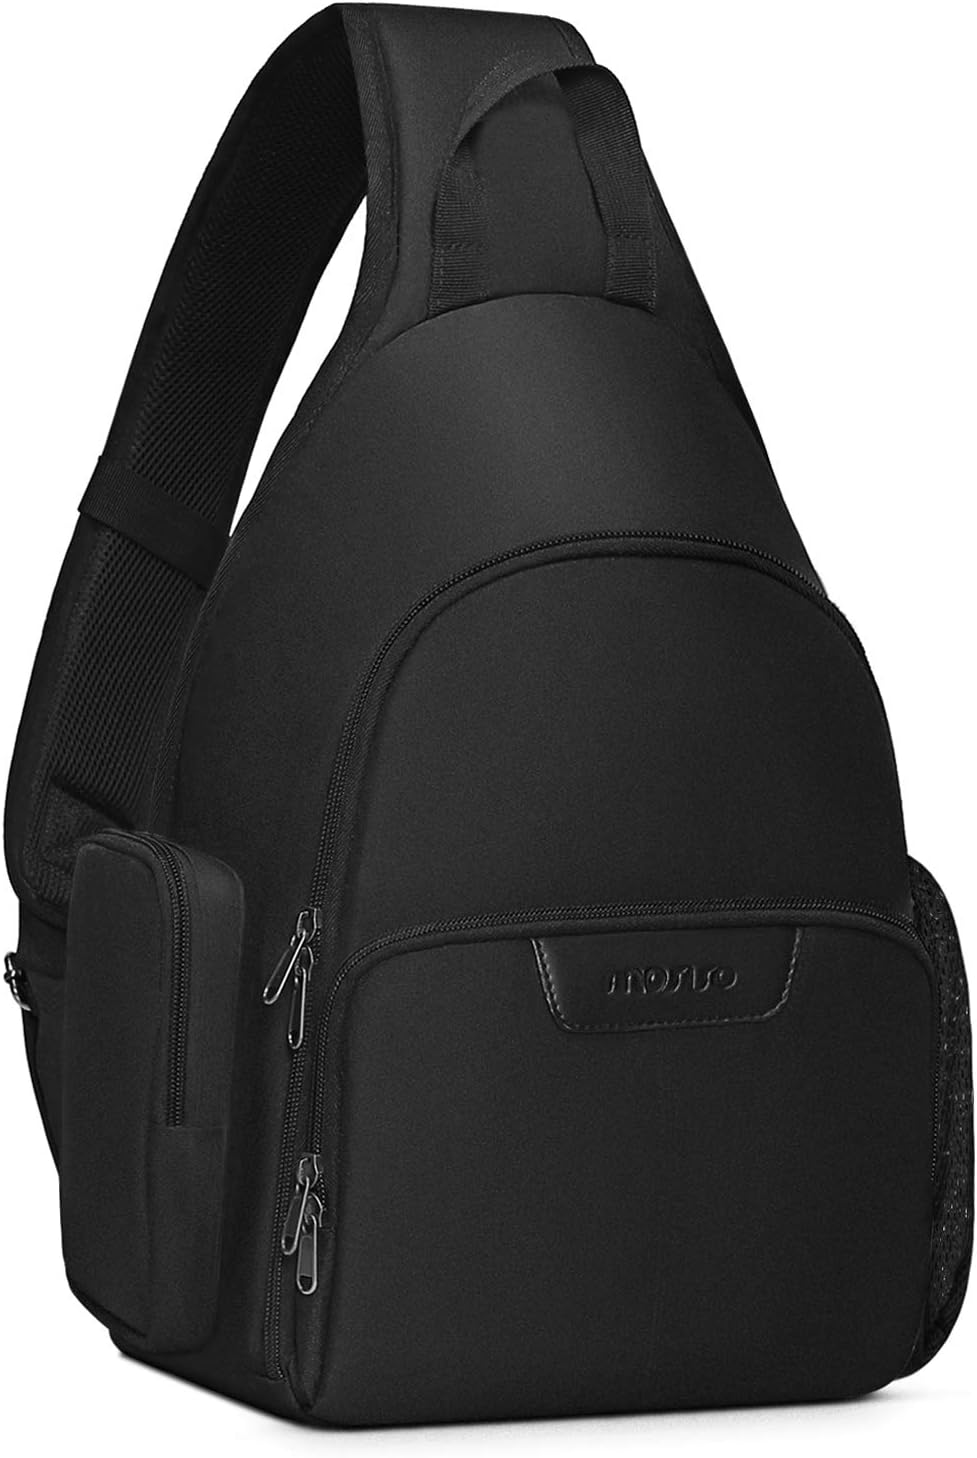 MOSISO Camera Bag Sling Backpack, Full Open Camera Case with